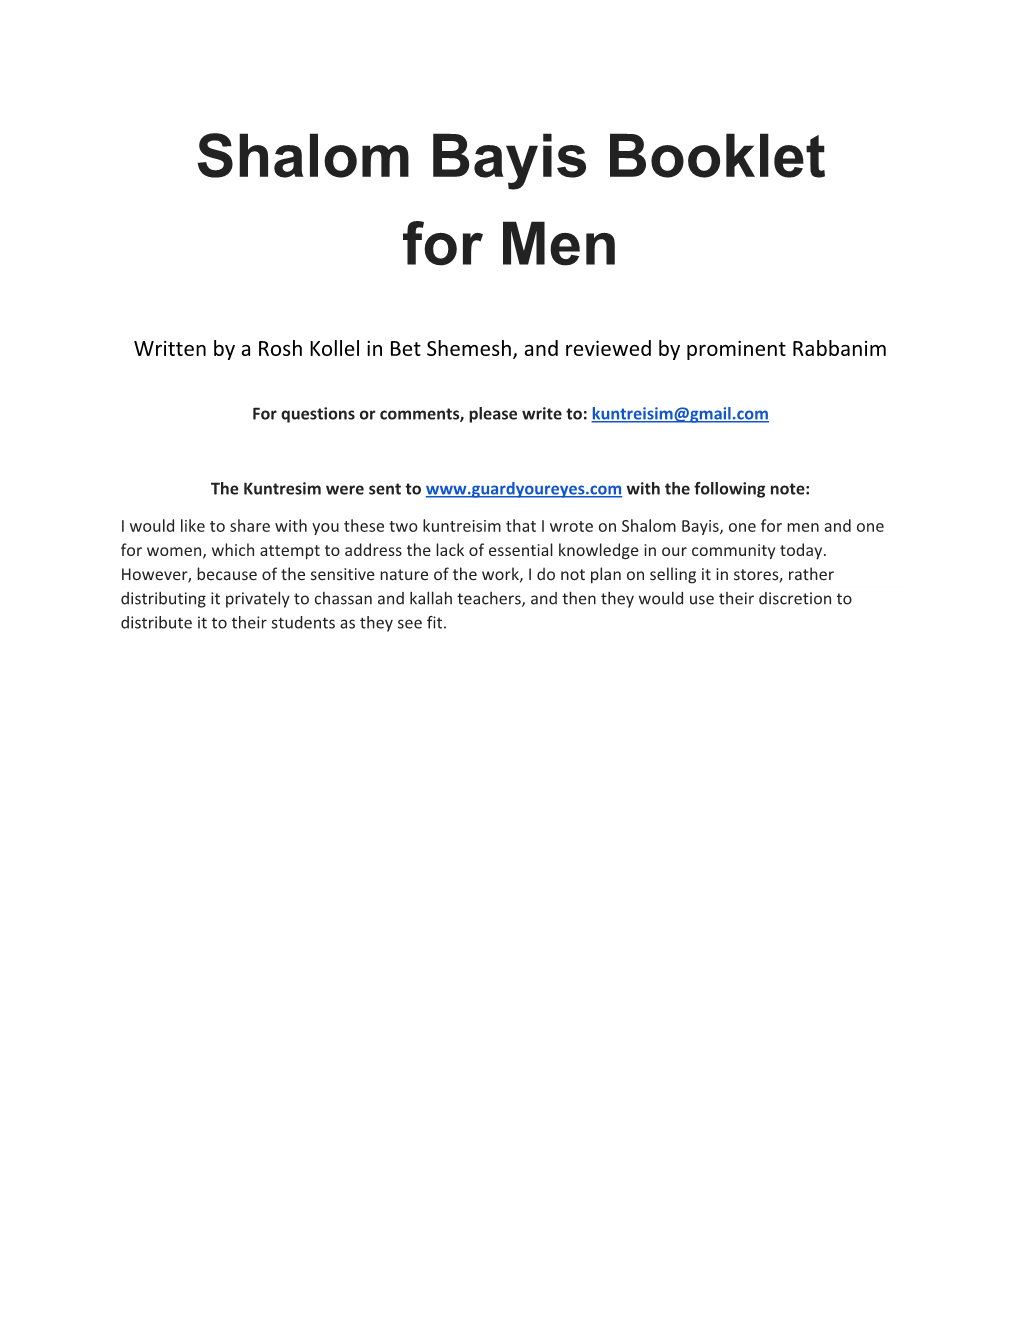 Shalom Bayis Booklet For